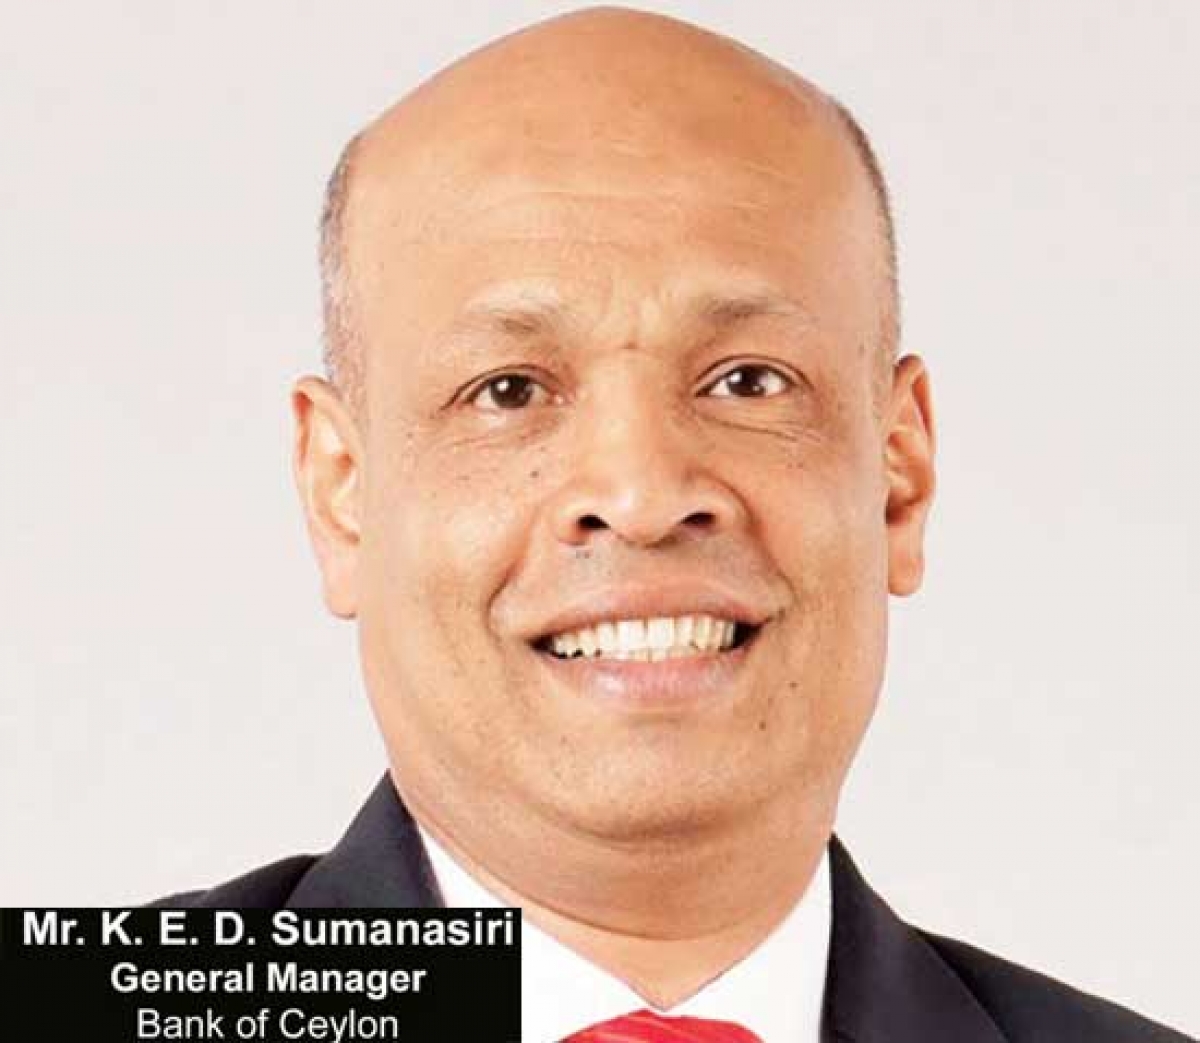 BOC appoints K.E.D. Sumanasiri as new General Manager